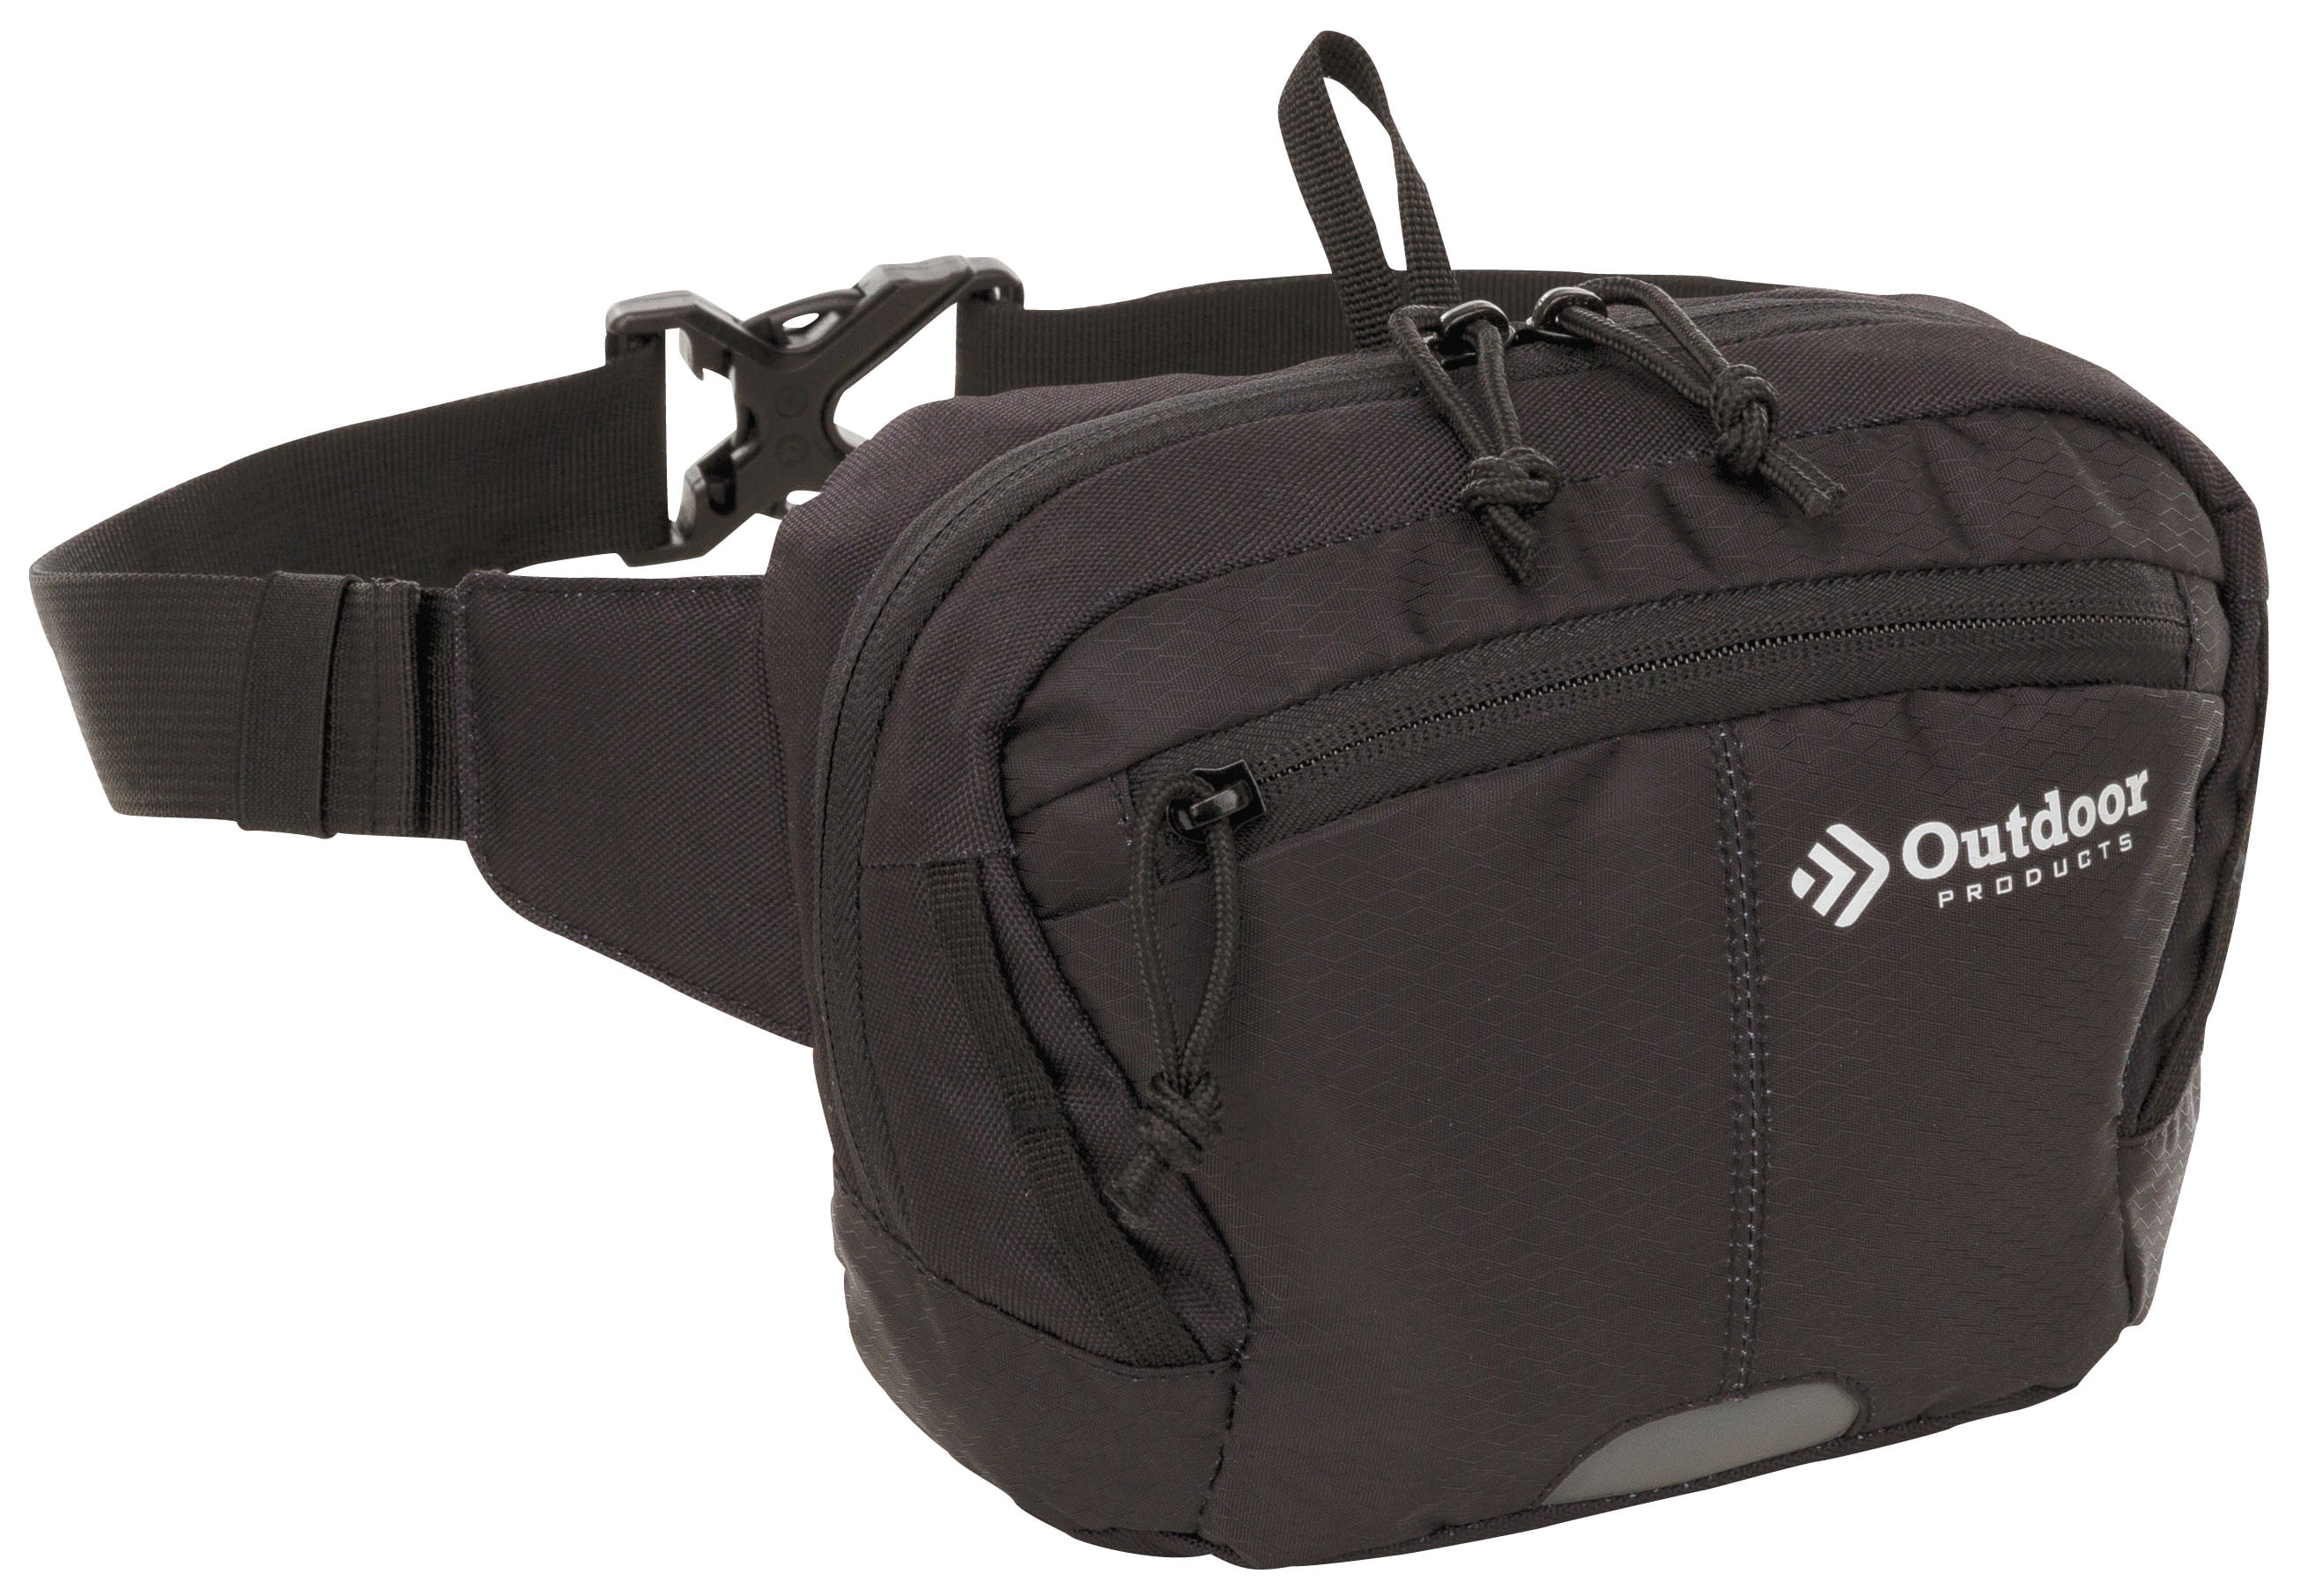 Outdoor Products - Outdoor Products Essential Waist Pack Fanny Pack, Black, Unisex, Polyester ...